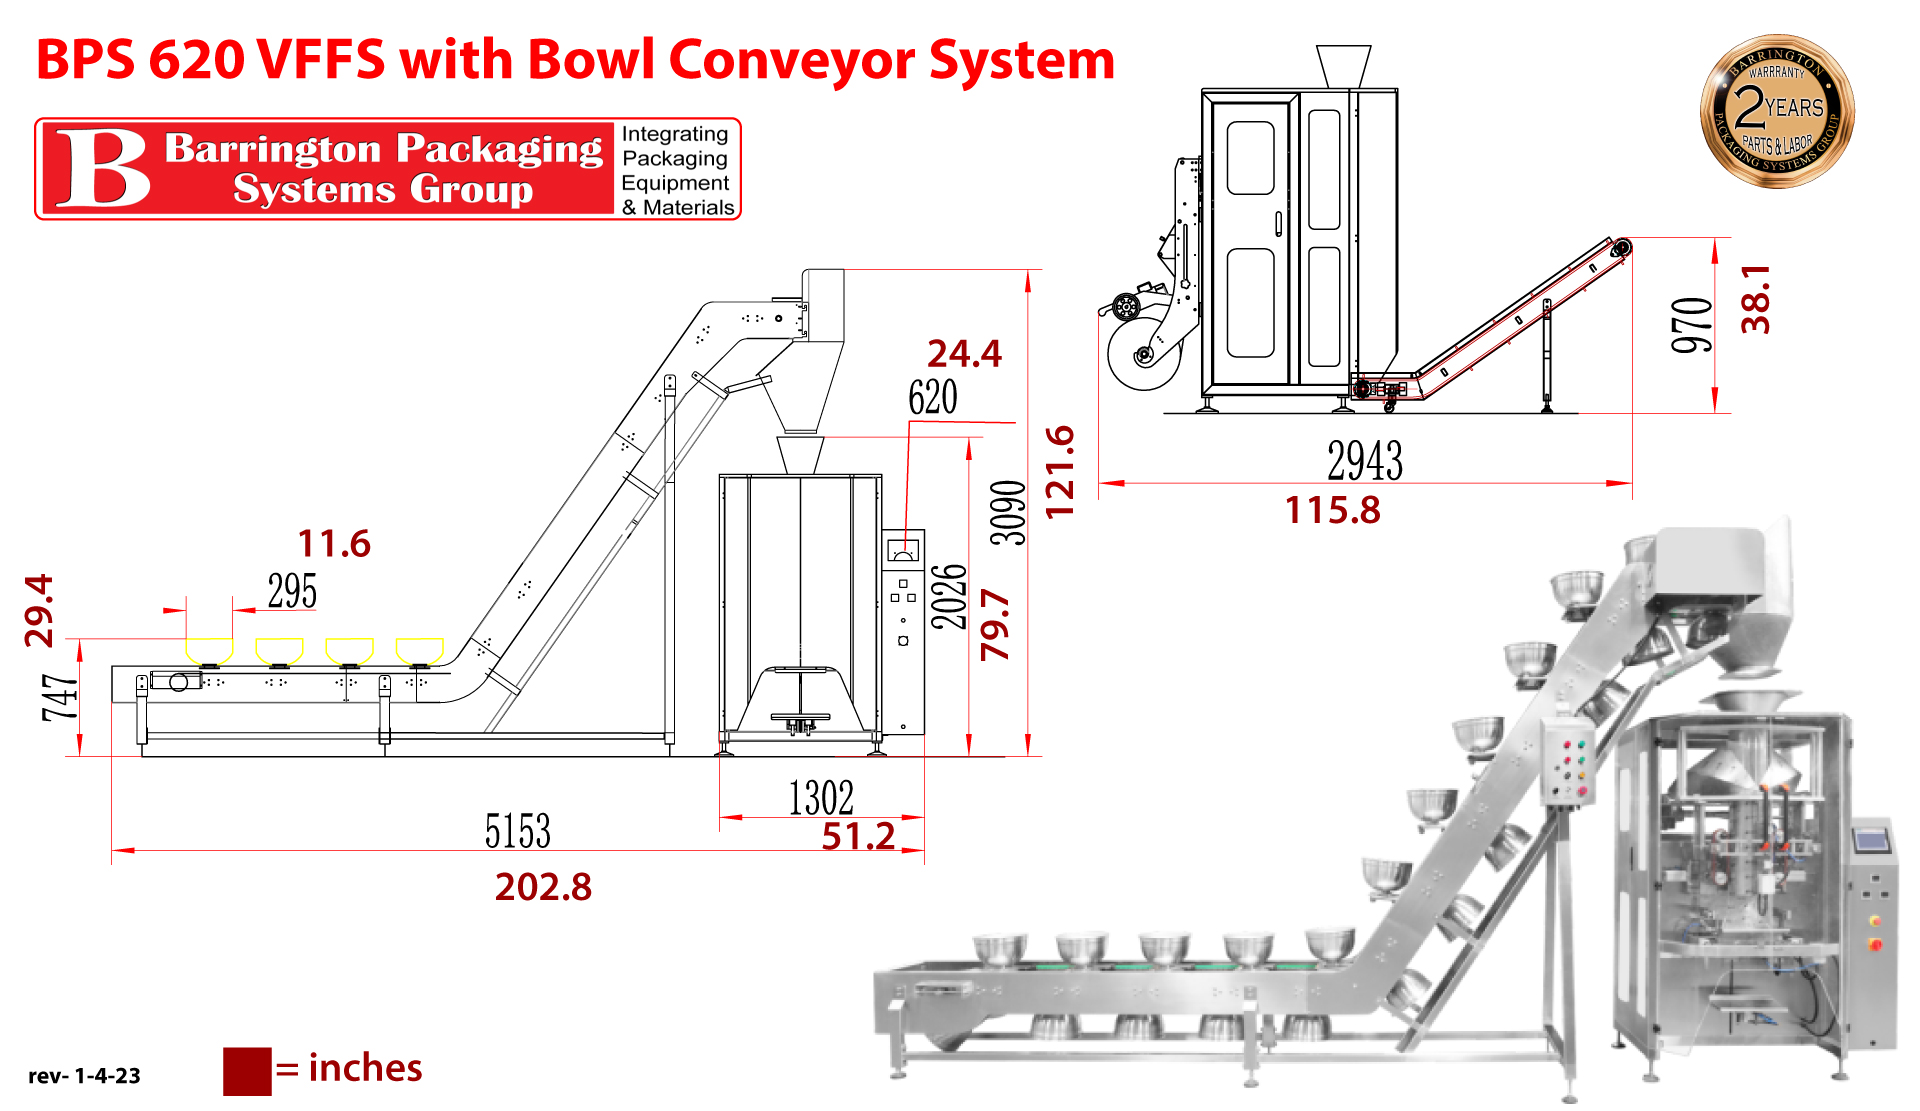 VFFS (Vertical Form Fill Seal) with Bowl Conveyor Filling system refers to a packaging machine that forms a bag from a roll of packaging material, fills it with the desired product using a bowl conveyor, and seals it.

      The bowl conveyor is used to transfer the product to the filling station where it is dispensed into the bag. The VFFS machine forms the bag/package, fills it with the product and seals it, resulting in a completed, ready-to-ship package.